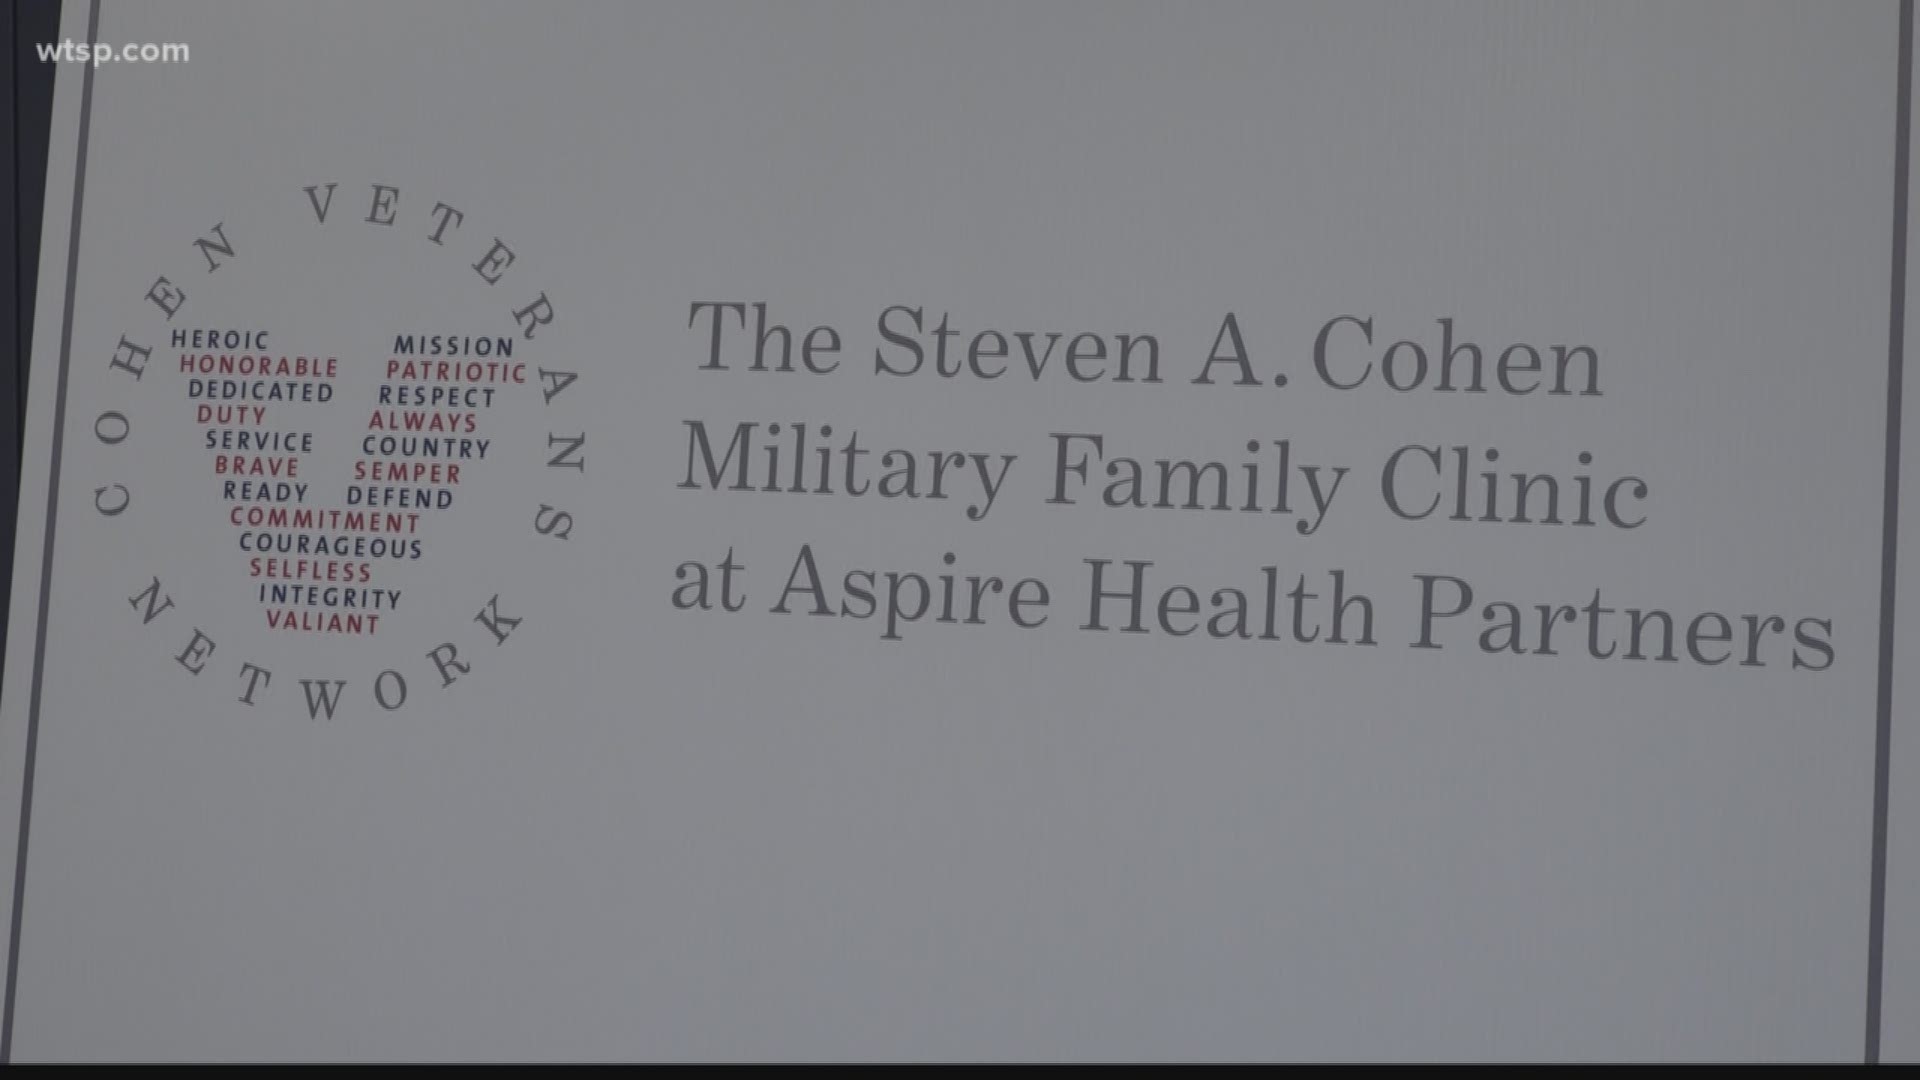 The Steven A. Cohen Military Family Clinic at Aspire Health Partners is breaking down barriers to Give veterans the help they need.